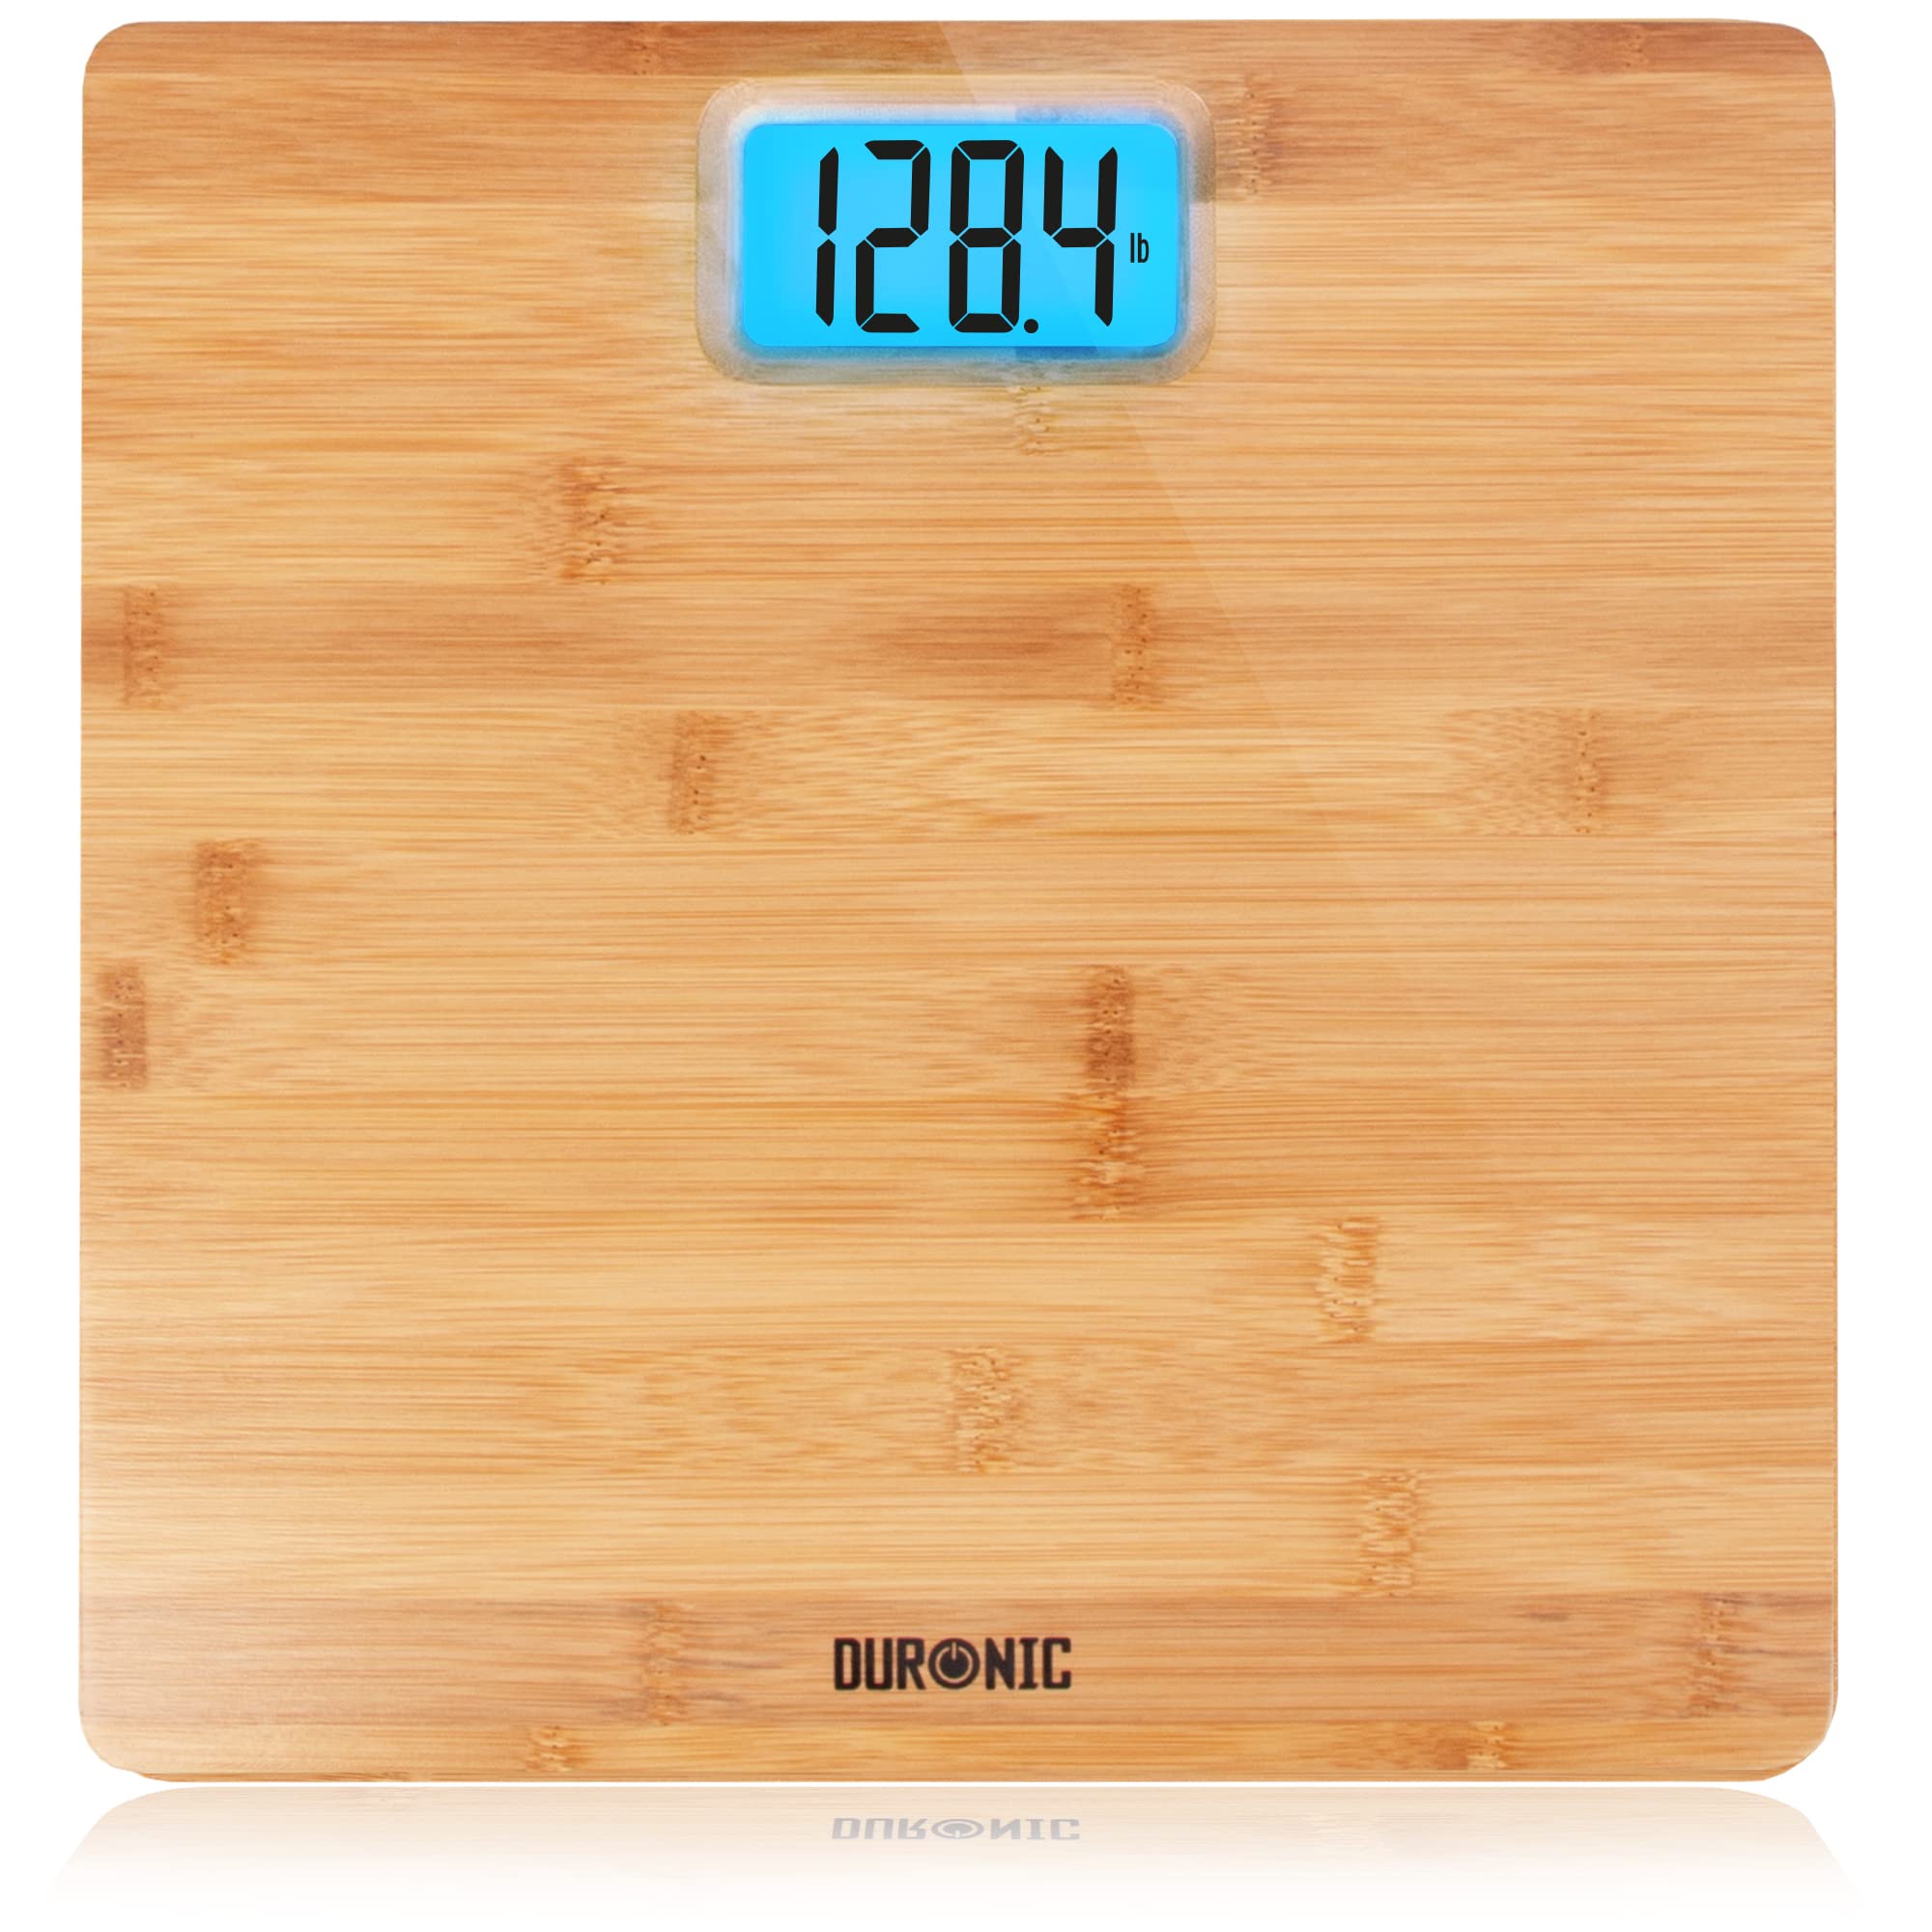 Duronic Digital Bathroom Scales BS504 Body Weight Weighing Scales Stone lb kg High Precision Sensors 180kg Capacity Eco-Friendly Bamboo Design